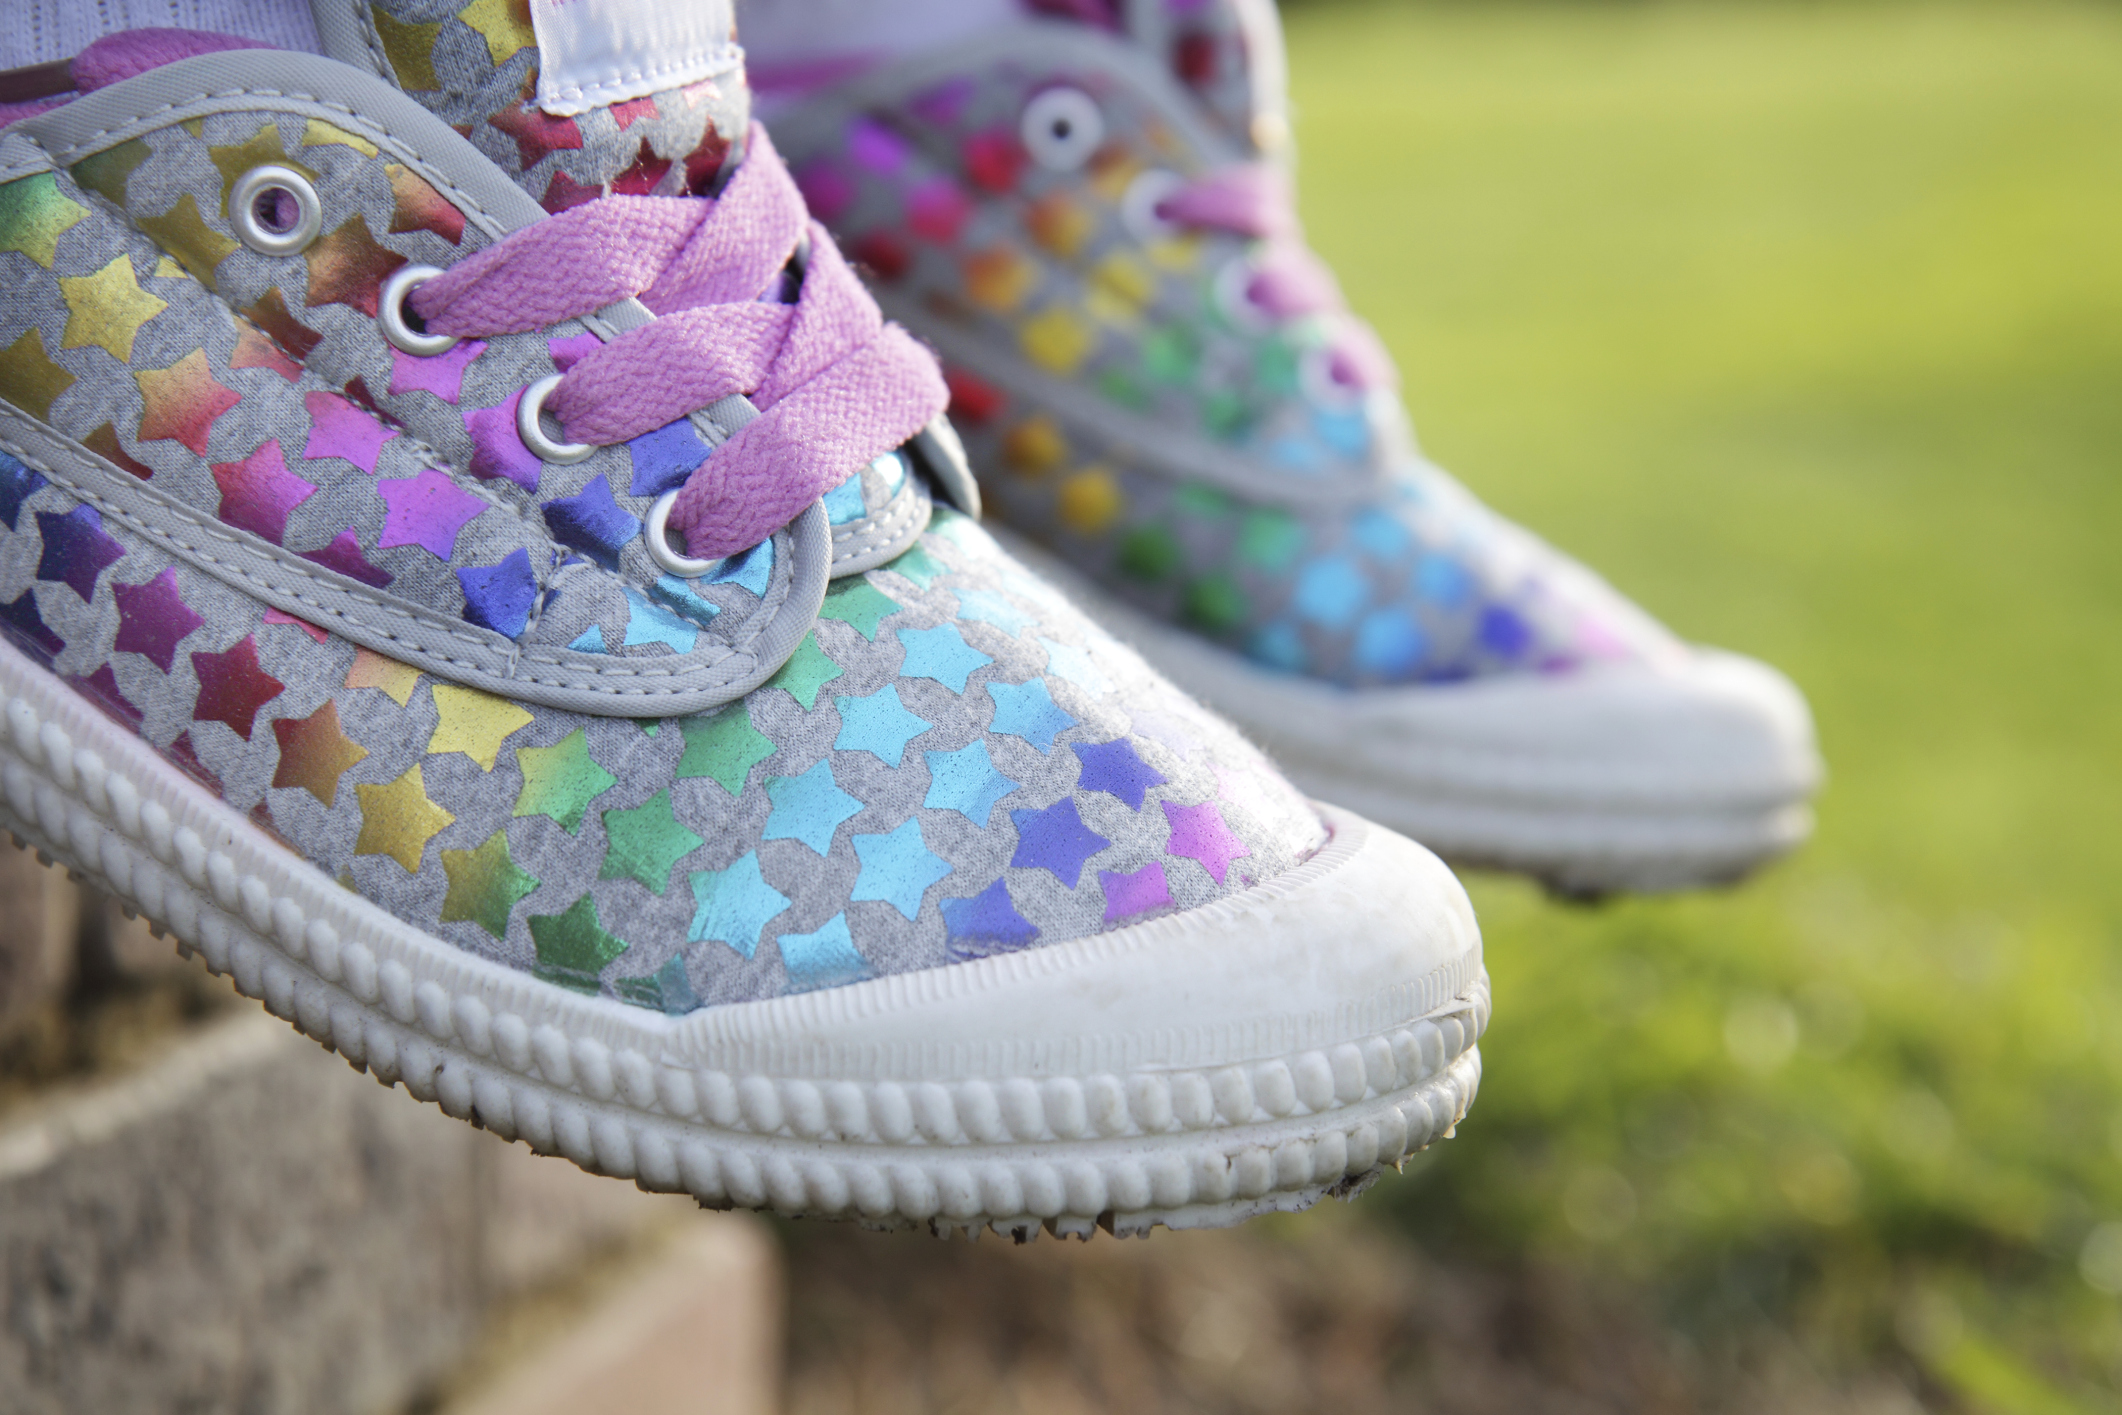 How to Customize Shoes Using Regular Acrylic Paint